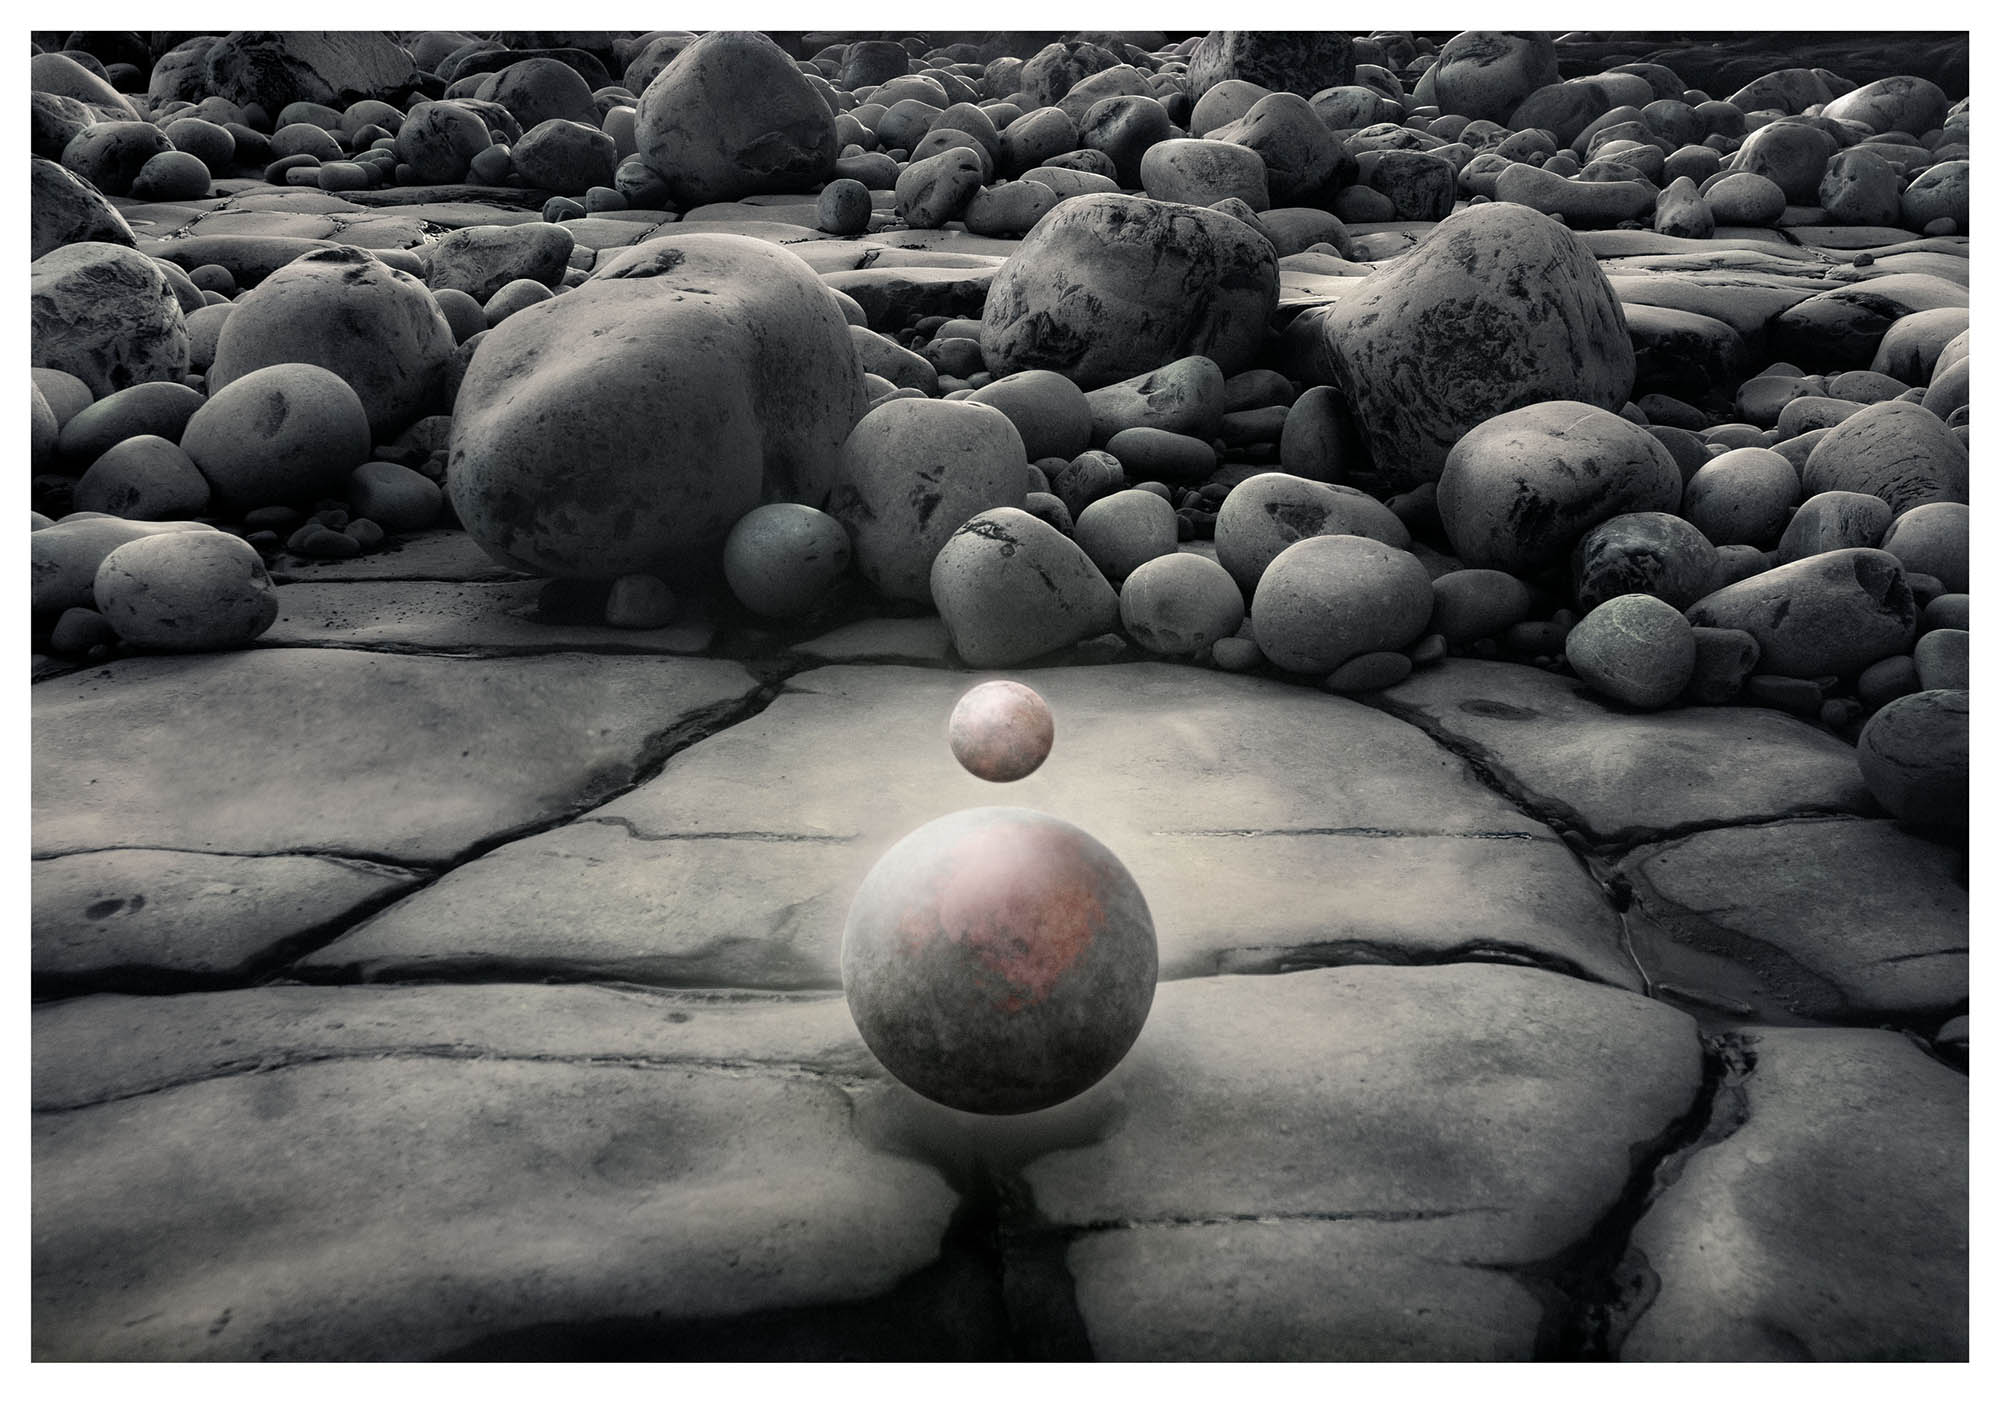 Jurassic boulders form background for small planet floating above larger one in surreal fantadsy universe photograph